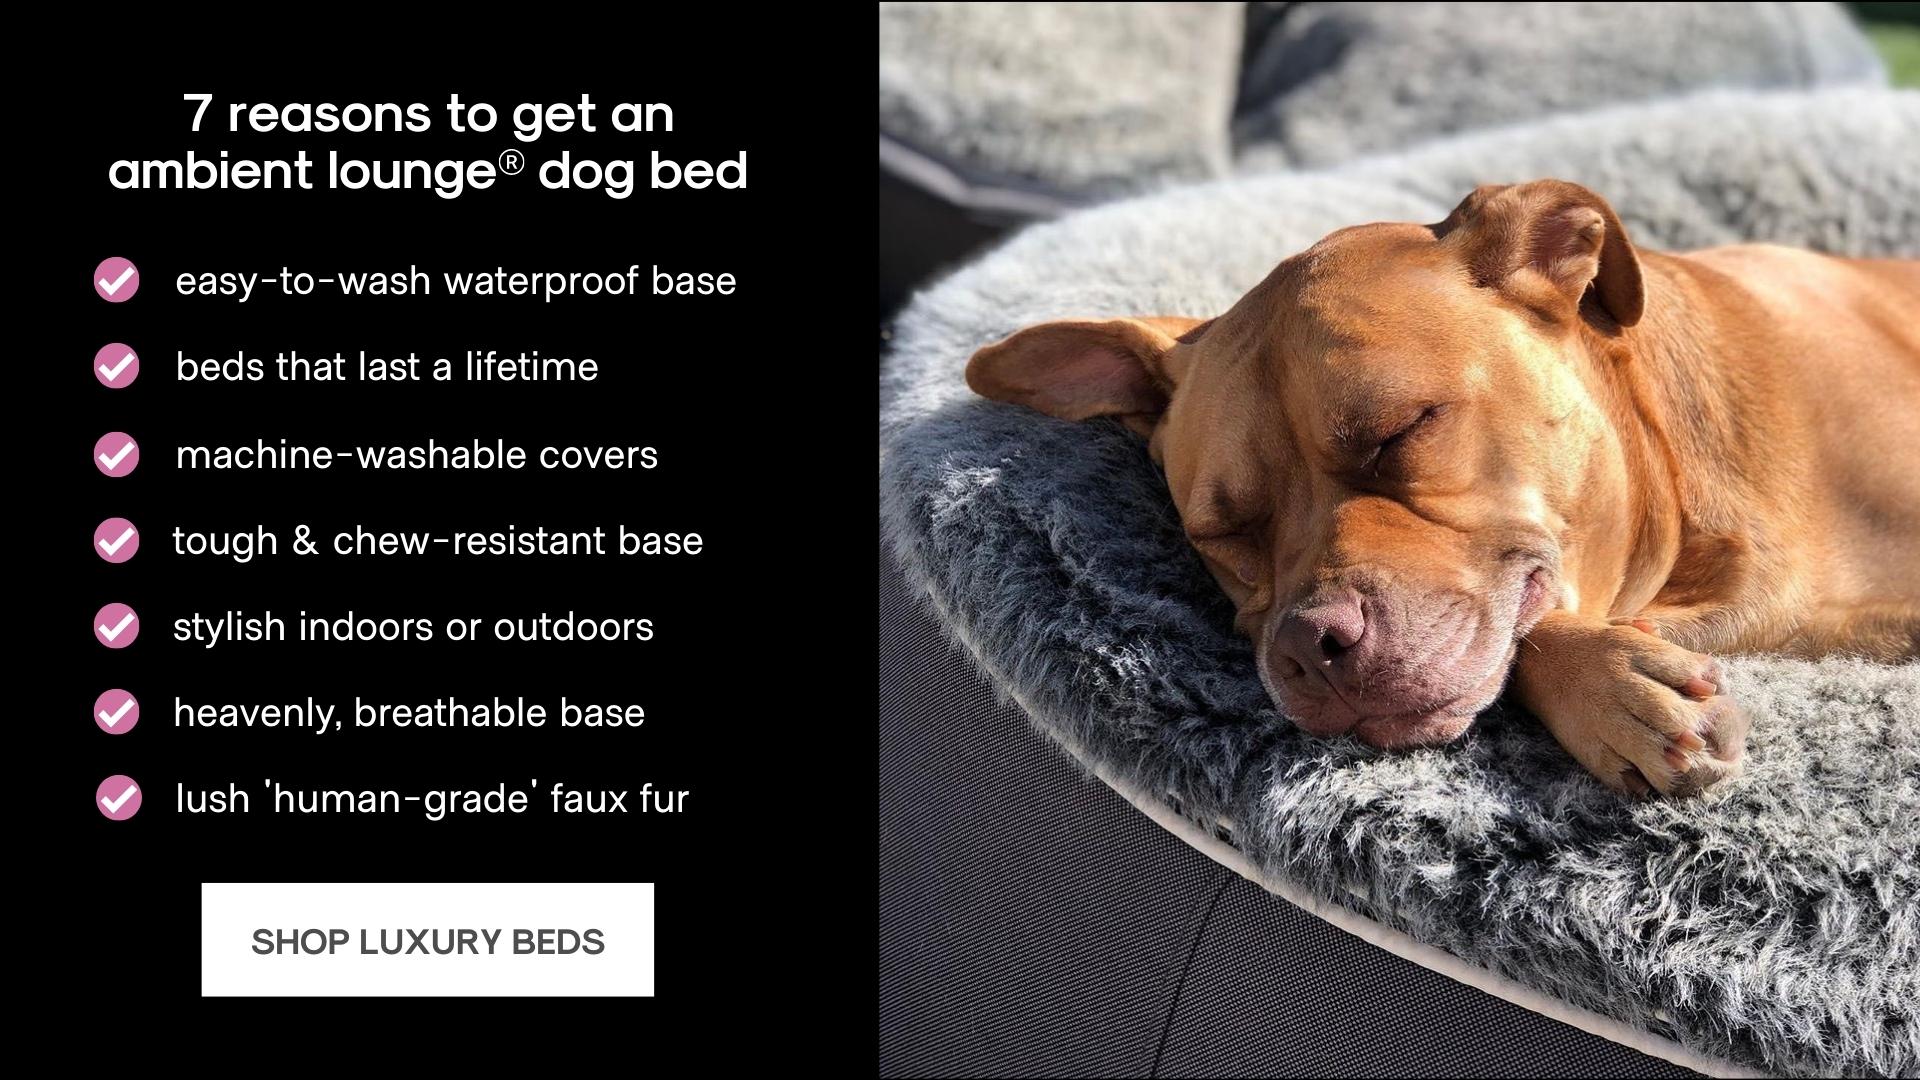 7 reasons to get an ambient lounge dog bed